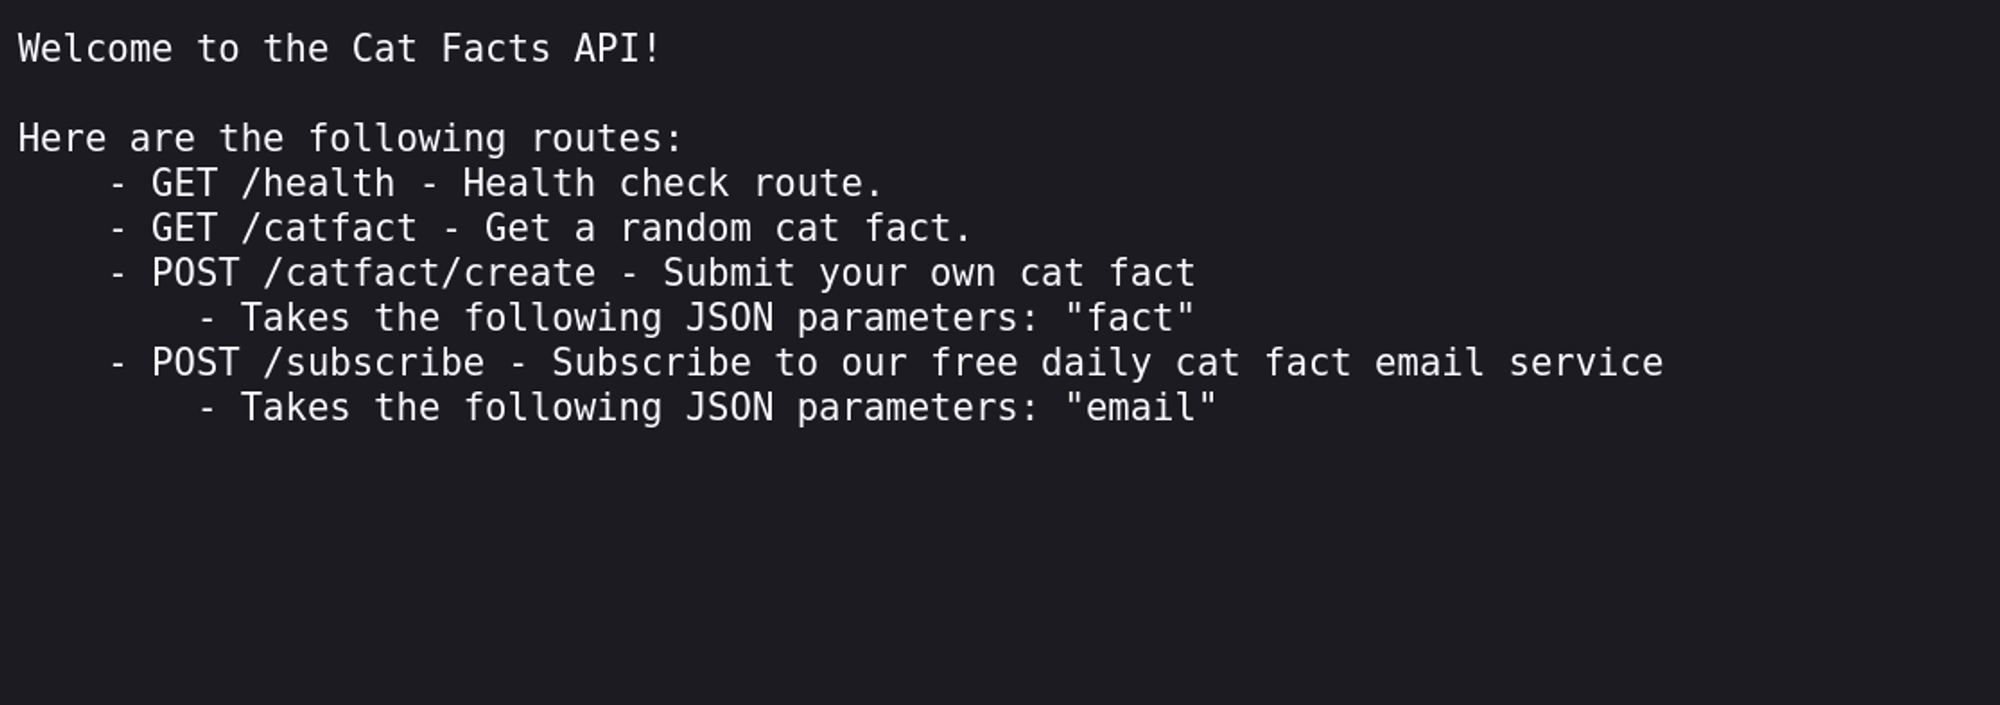 Preview of the cat facts API front page